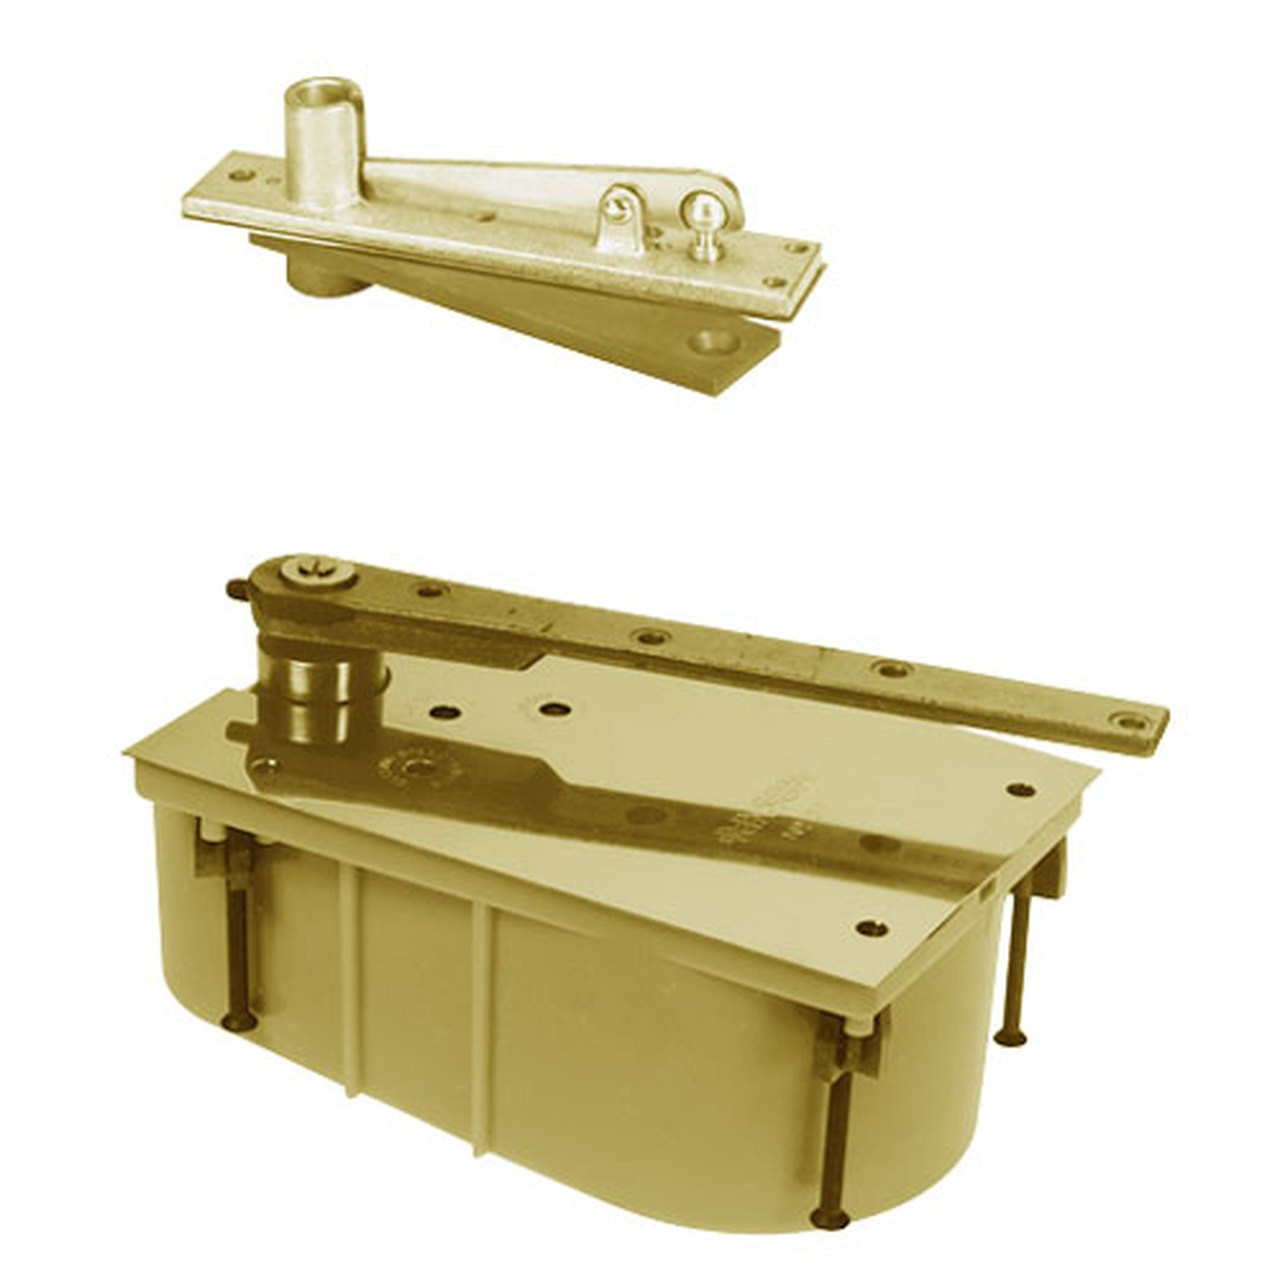 28-90S-554-LCC-RH-606 Rixson 28 Series Heavy Duty Single Acting Center Hung Floor Closer with Concealed Arm in Satin Brass Finish